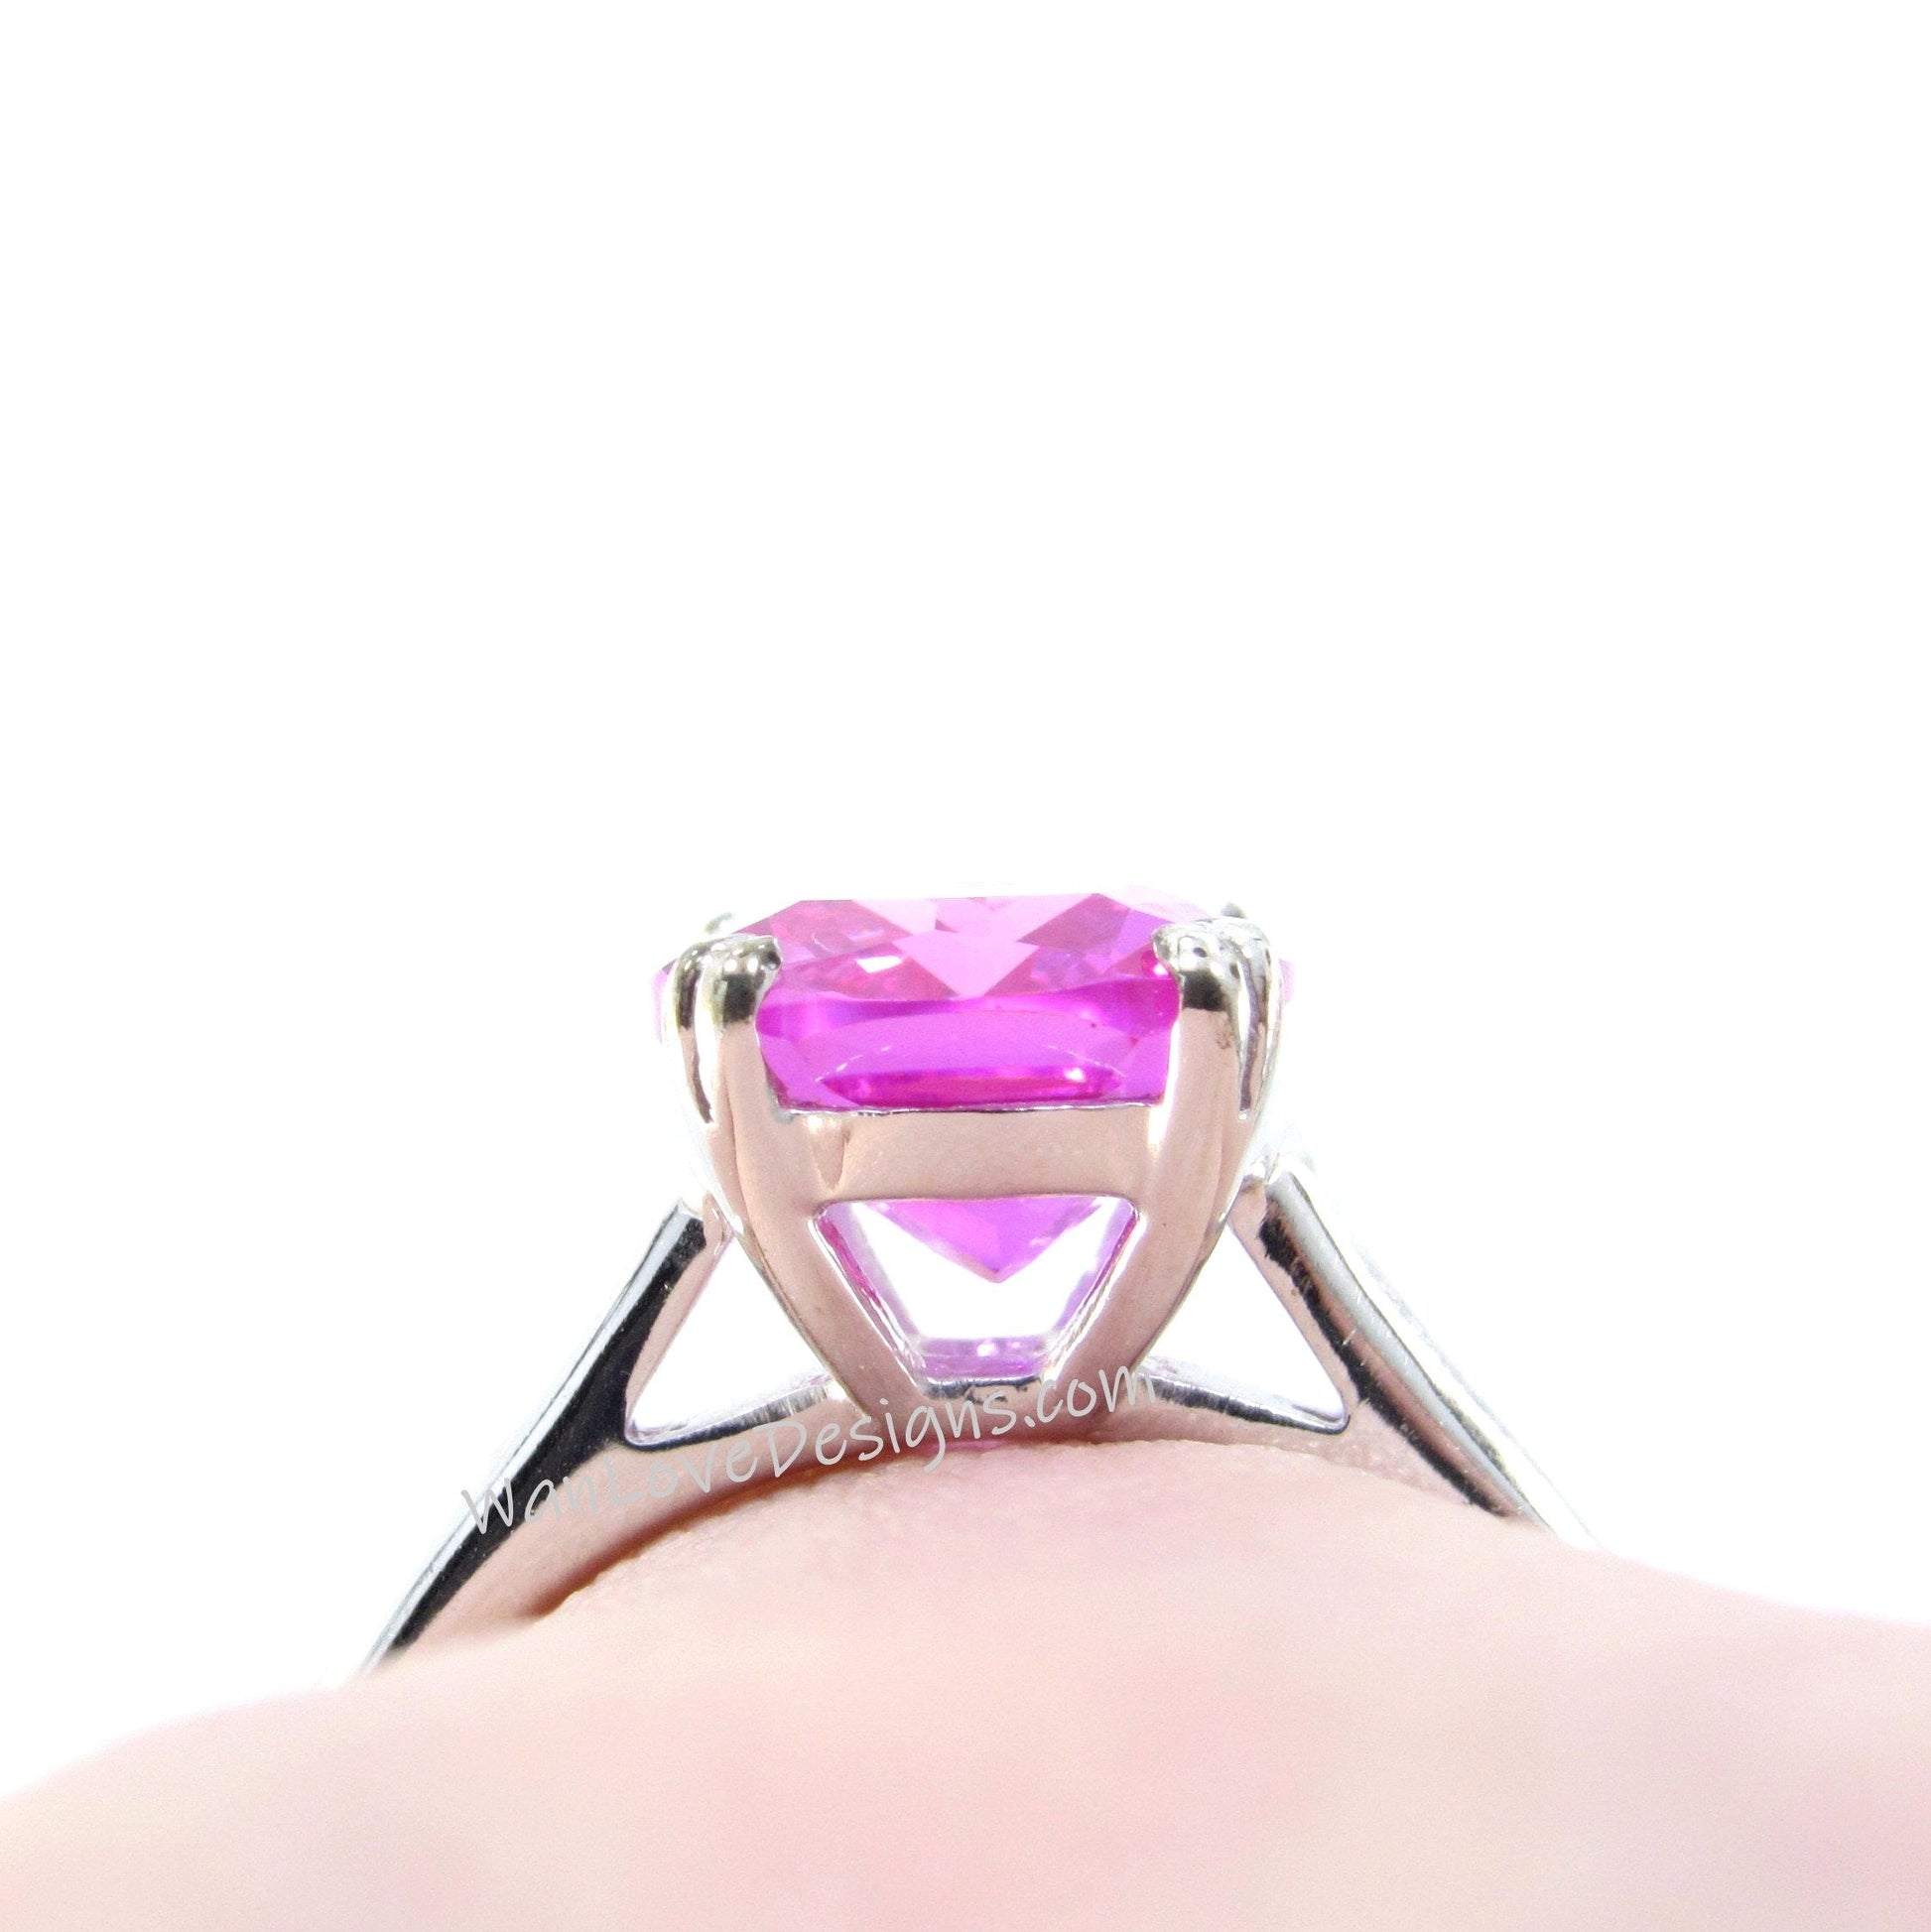 4 ct Elongated Cushion Cut Pink Sapphire Engagement Ring, Classic Solitaire Wedding Ring, Pink Sapphire Double Prong Bridal Promise Ring Wan Love Designs